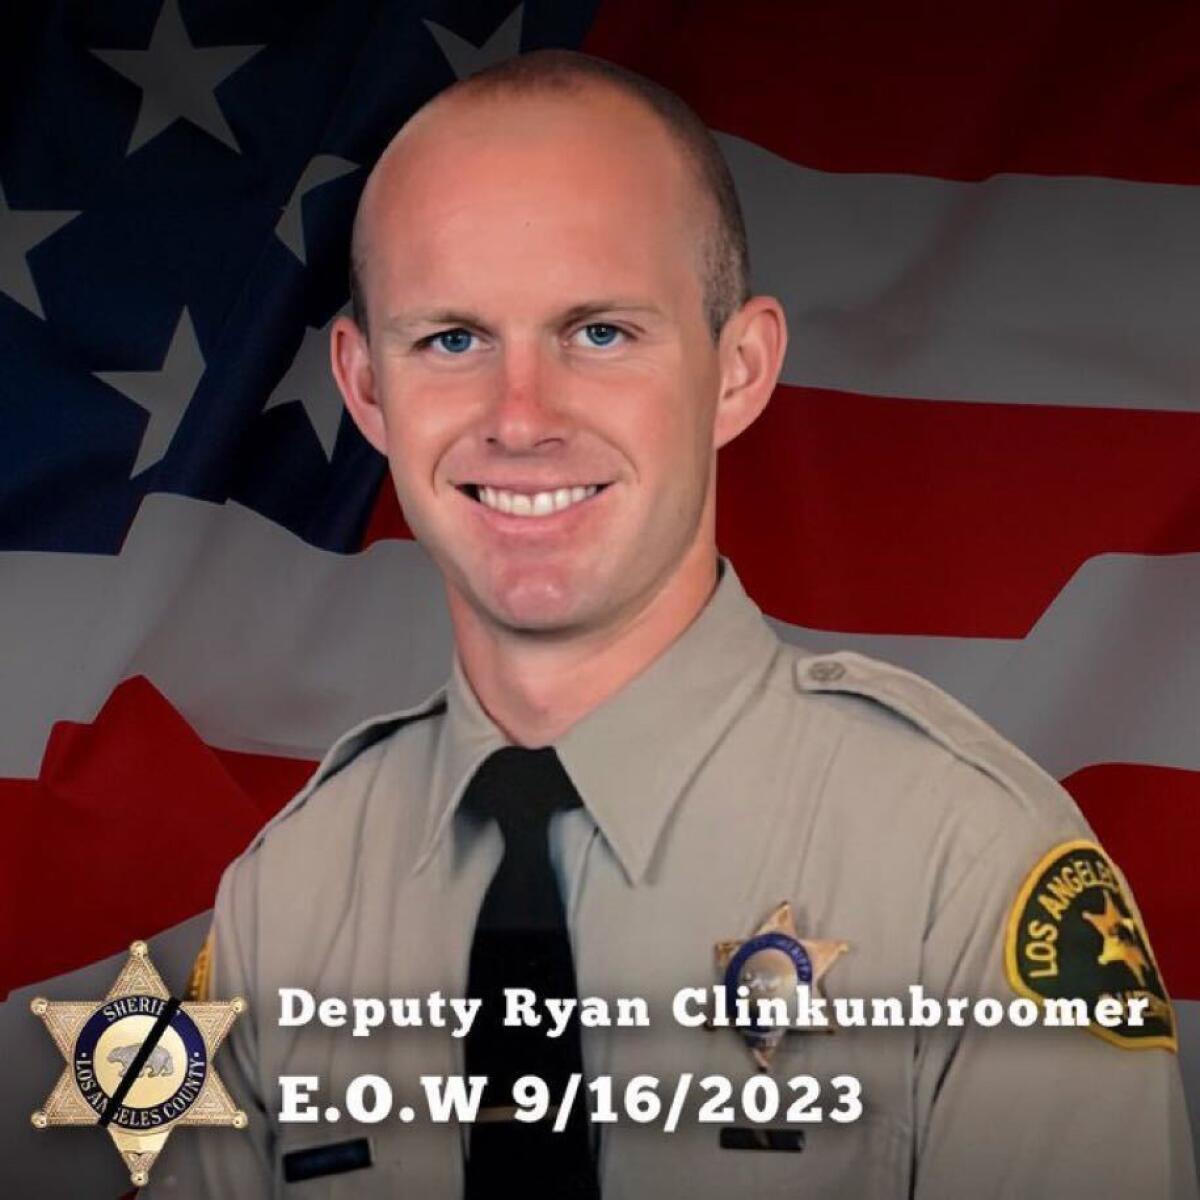 Los Angeles County Sheriff’s Deputy Ryan Clinkunbroomer was remembered by co-workers as the smart and dependable type.